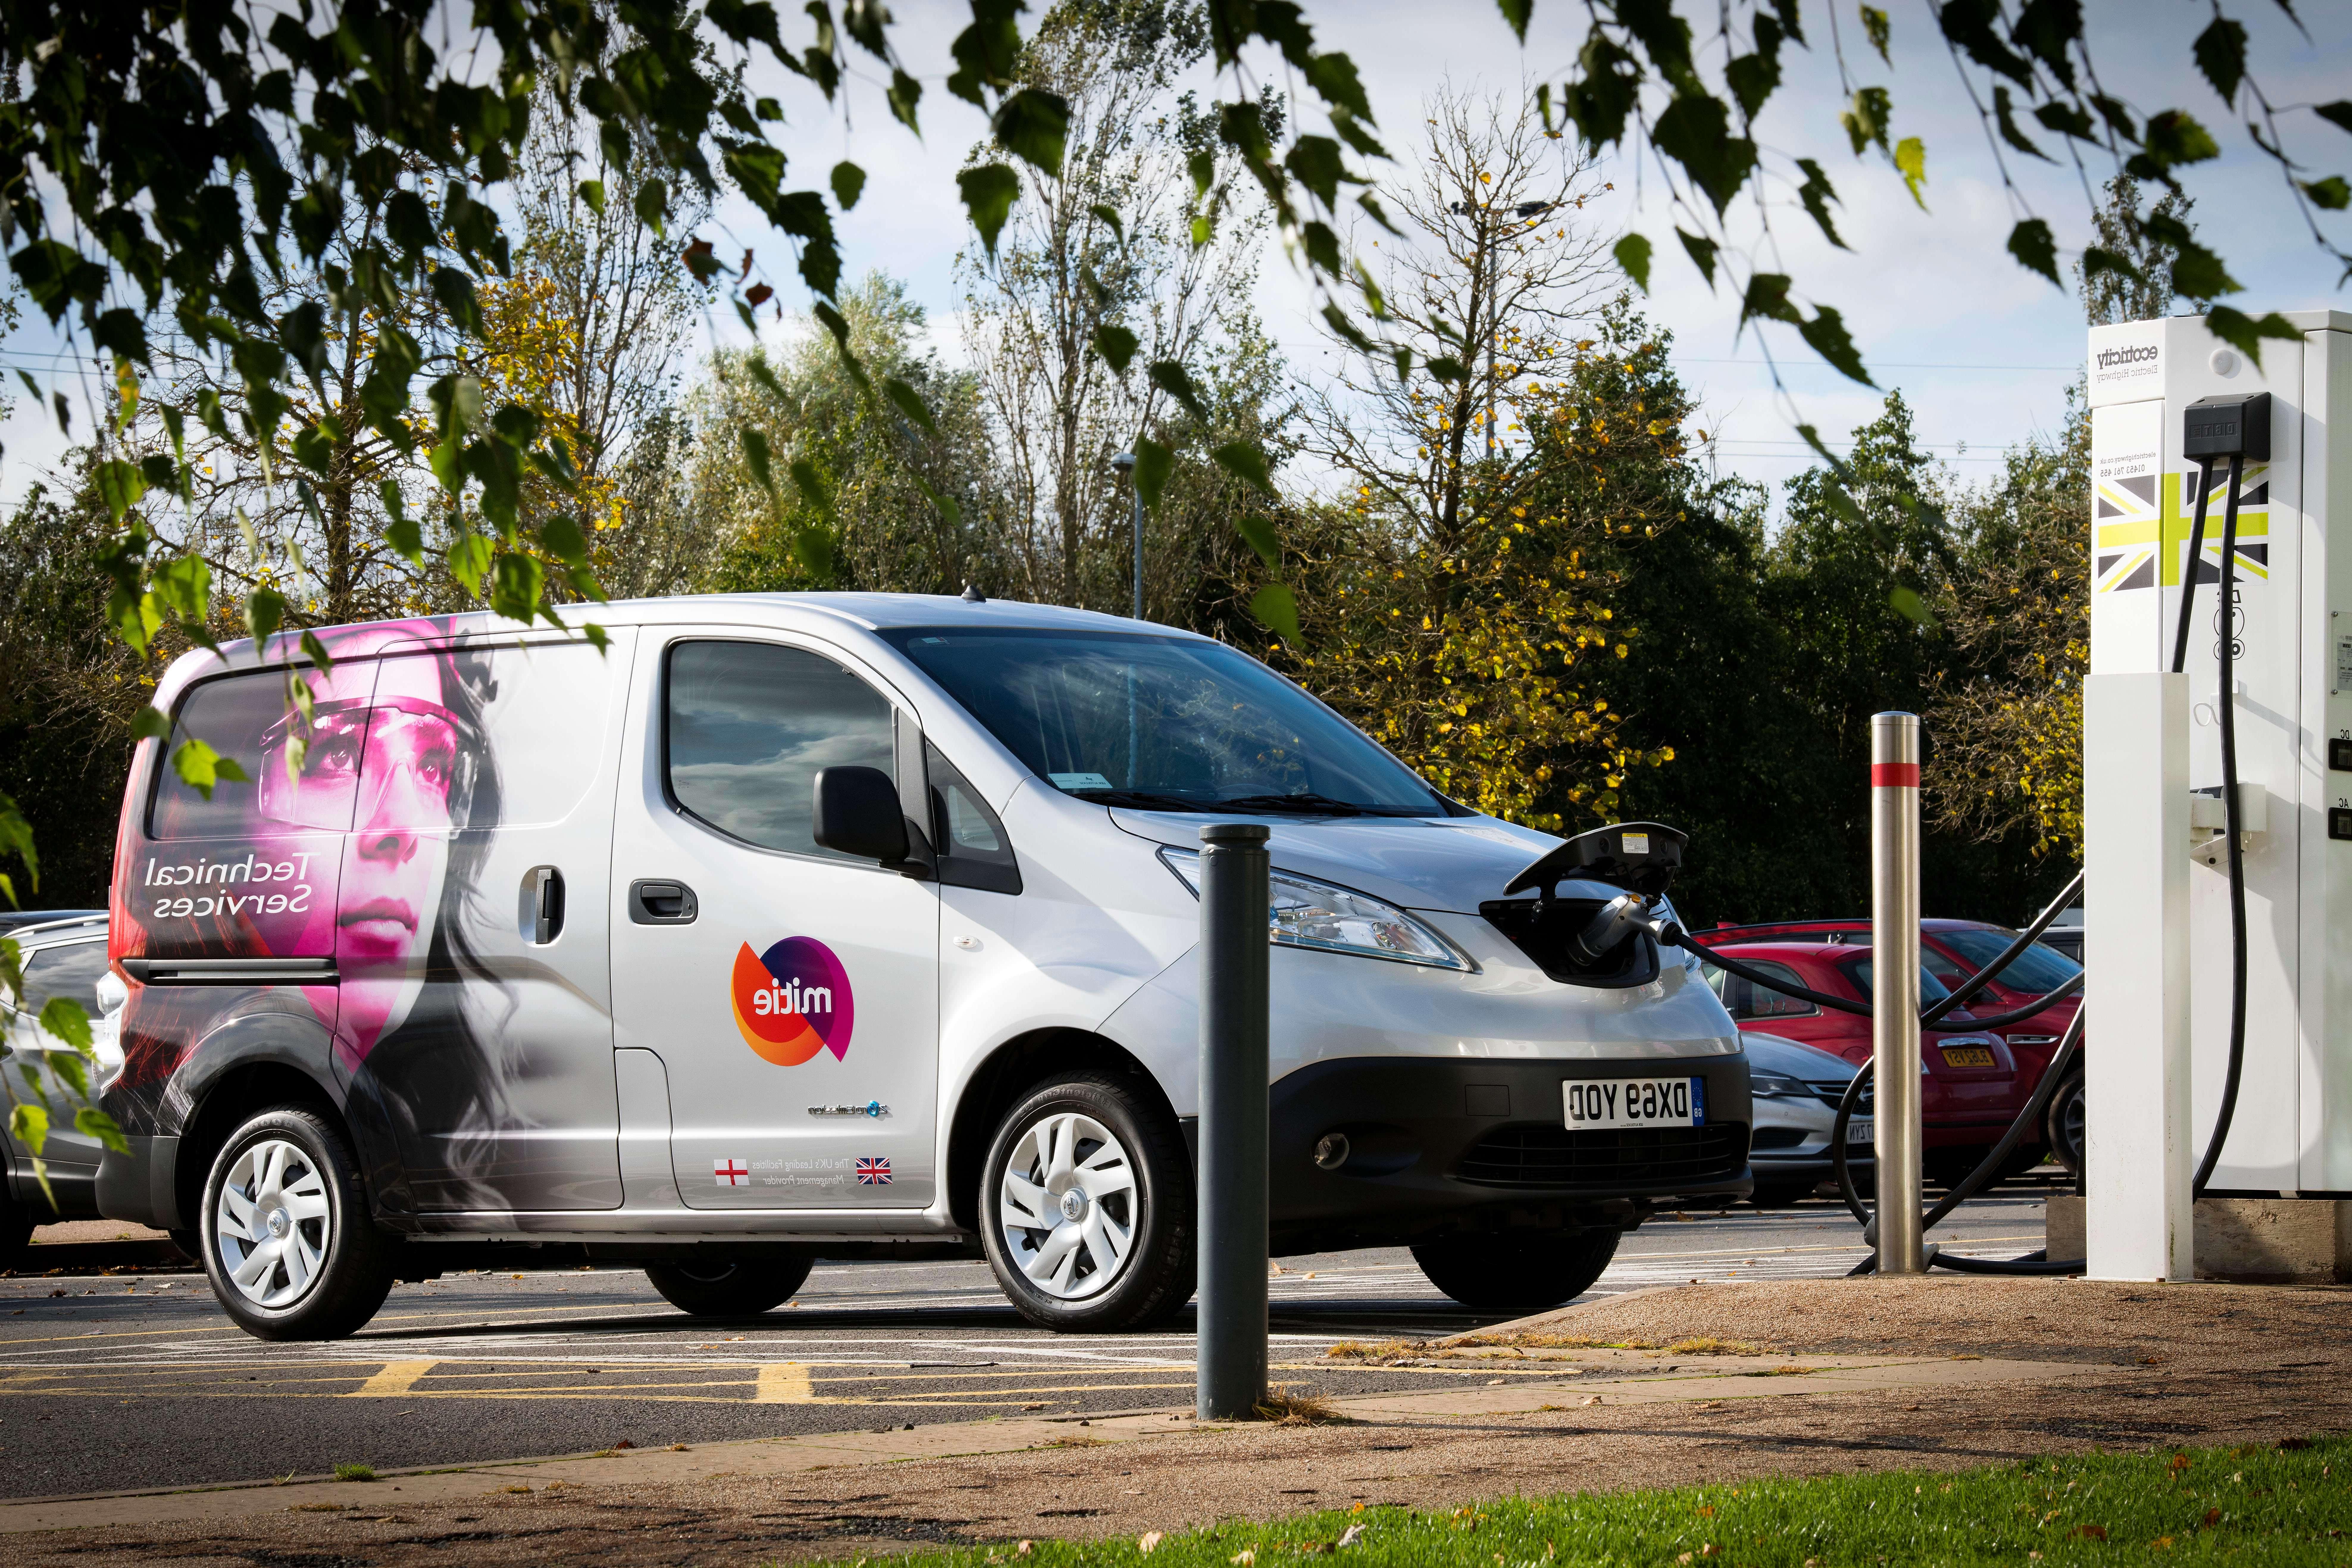 Mitie electric vehicle, plugged in and charging